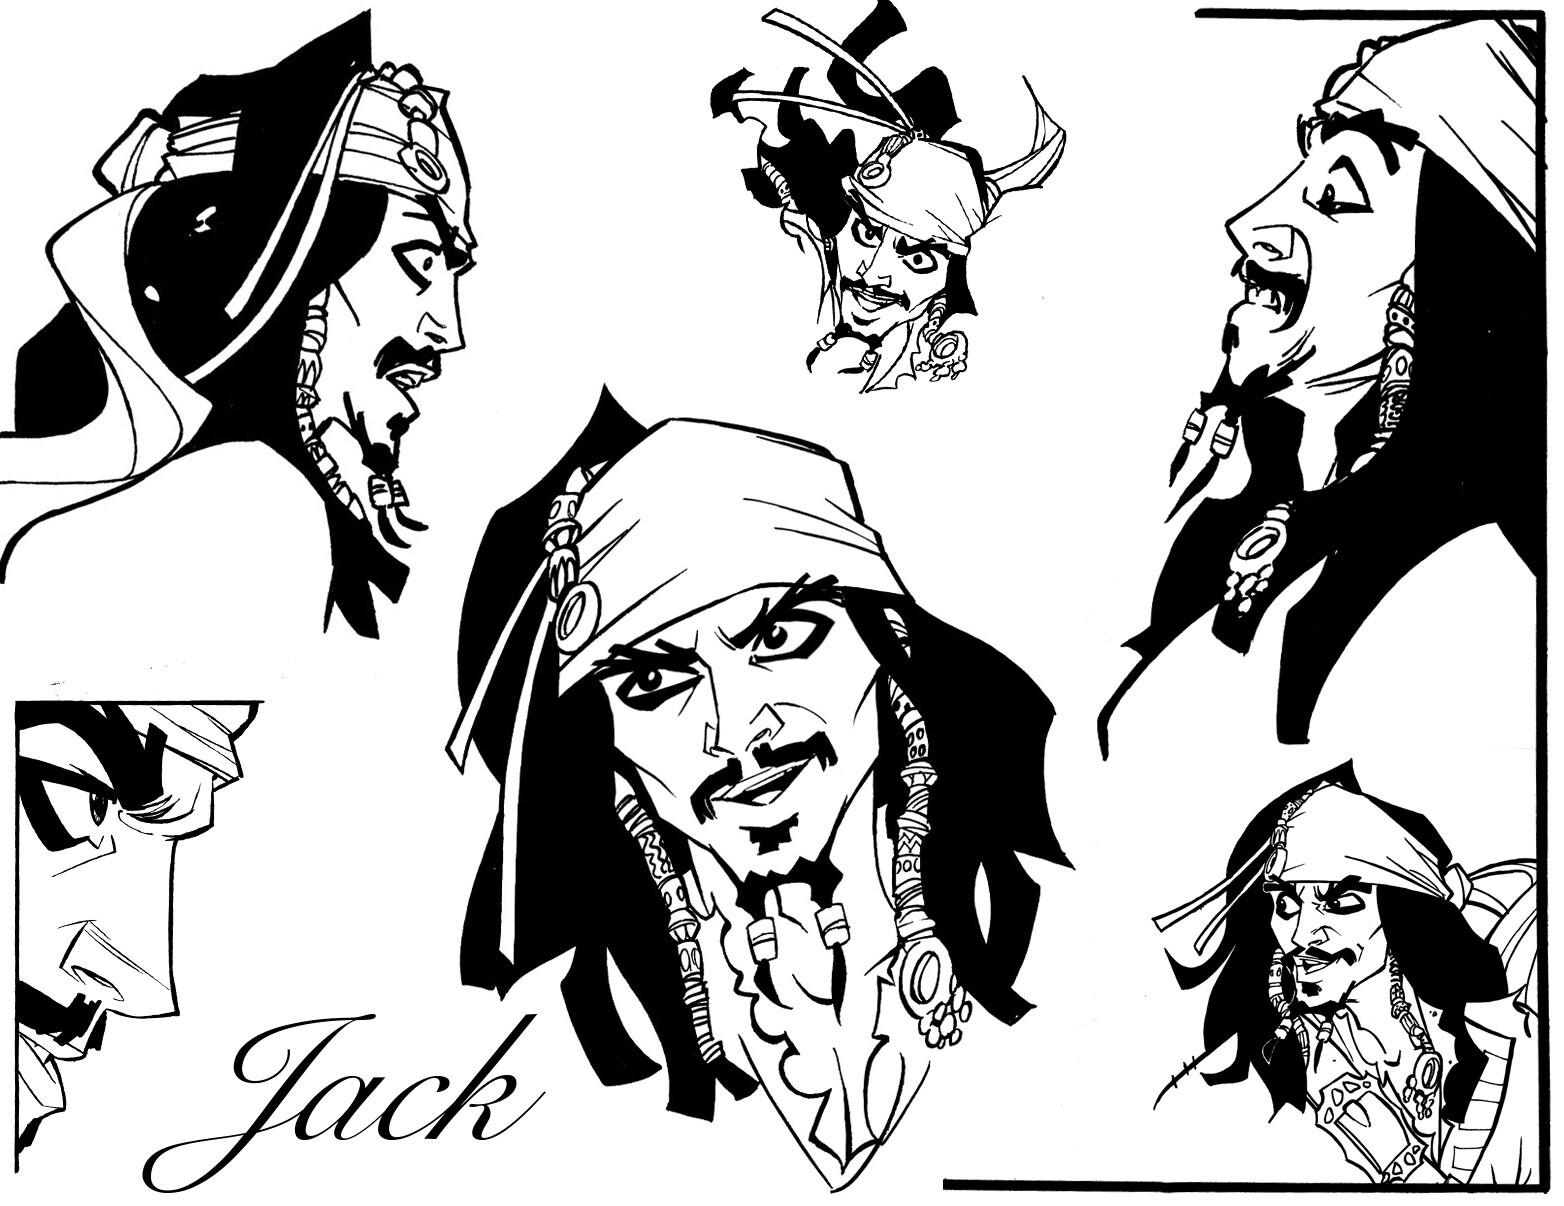 Jack Sparrow expressions.